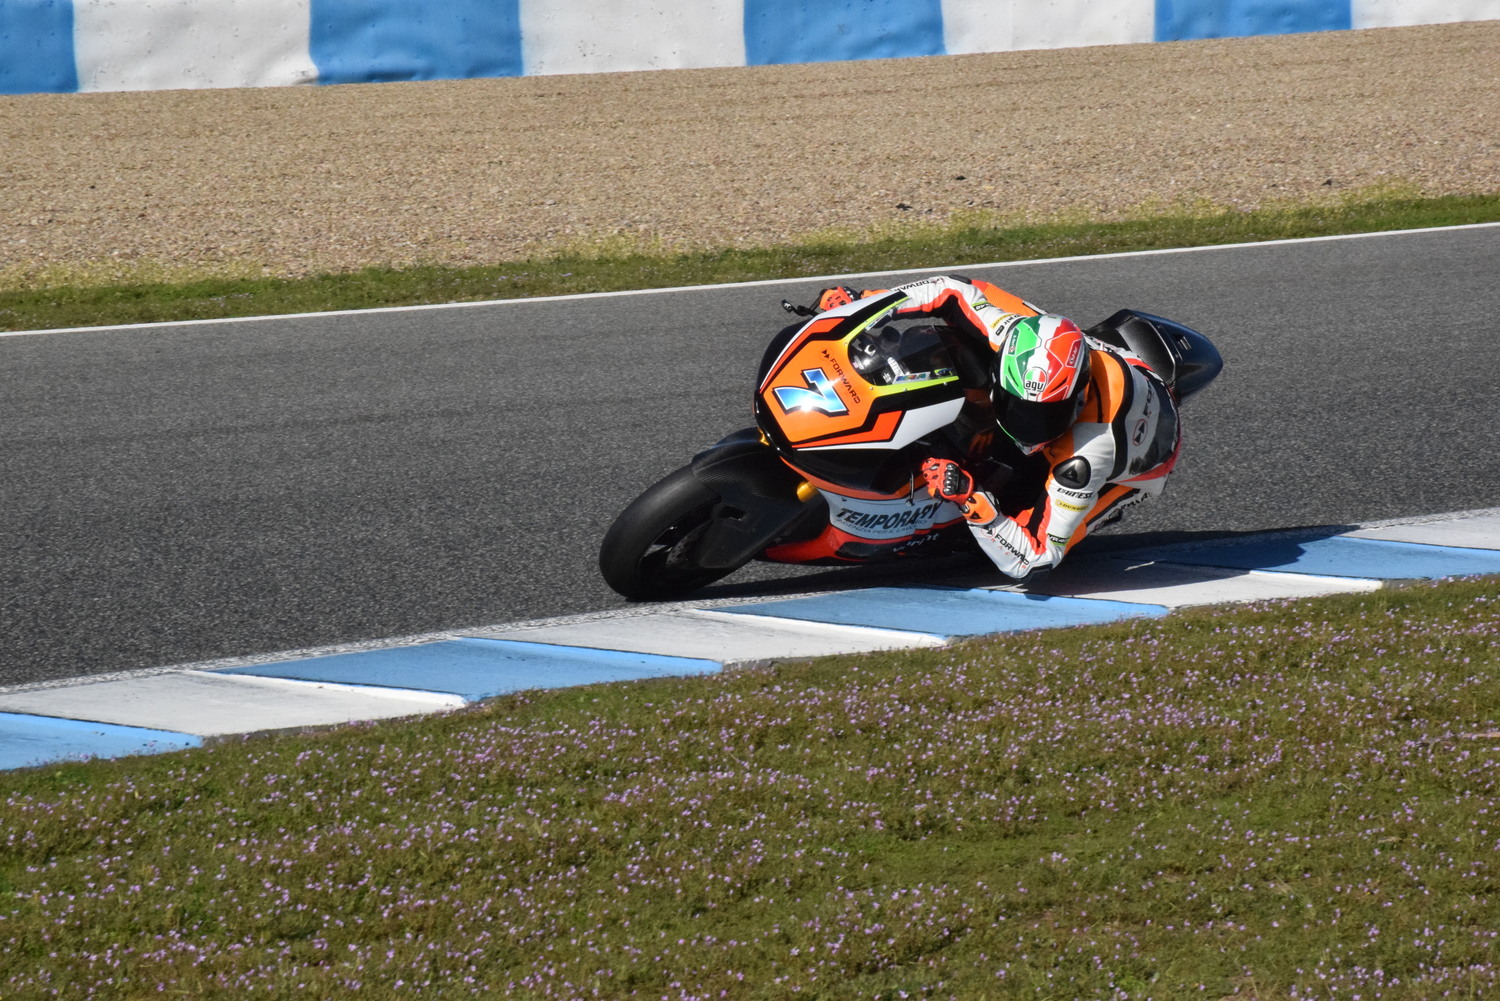 TESTING CONTINUES AT JEREZ FOR FORWARD RACING